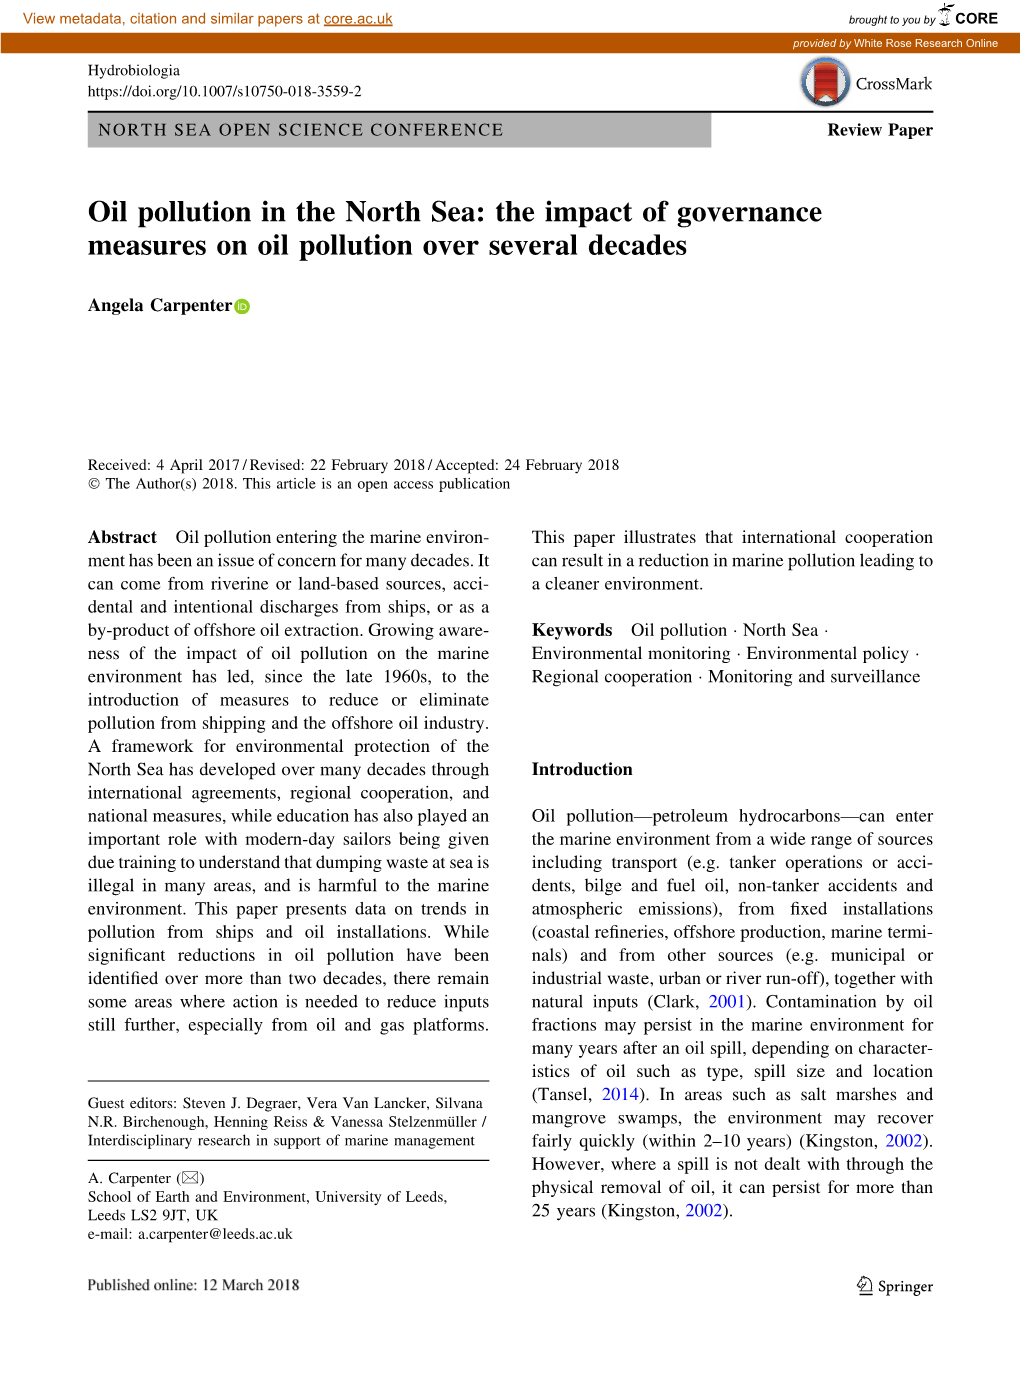 Oil Pollution in the North Sea: the Impact of Governance Measures on Oil Pollution Over Several Decades